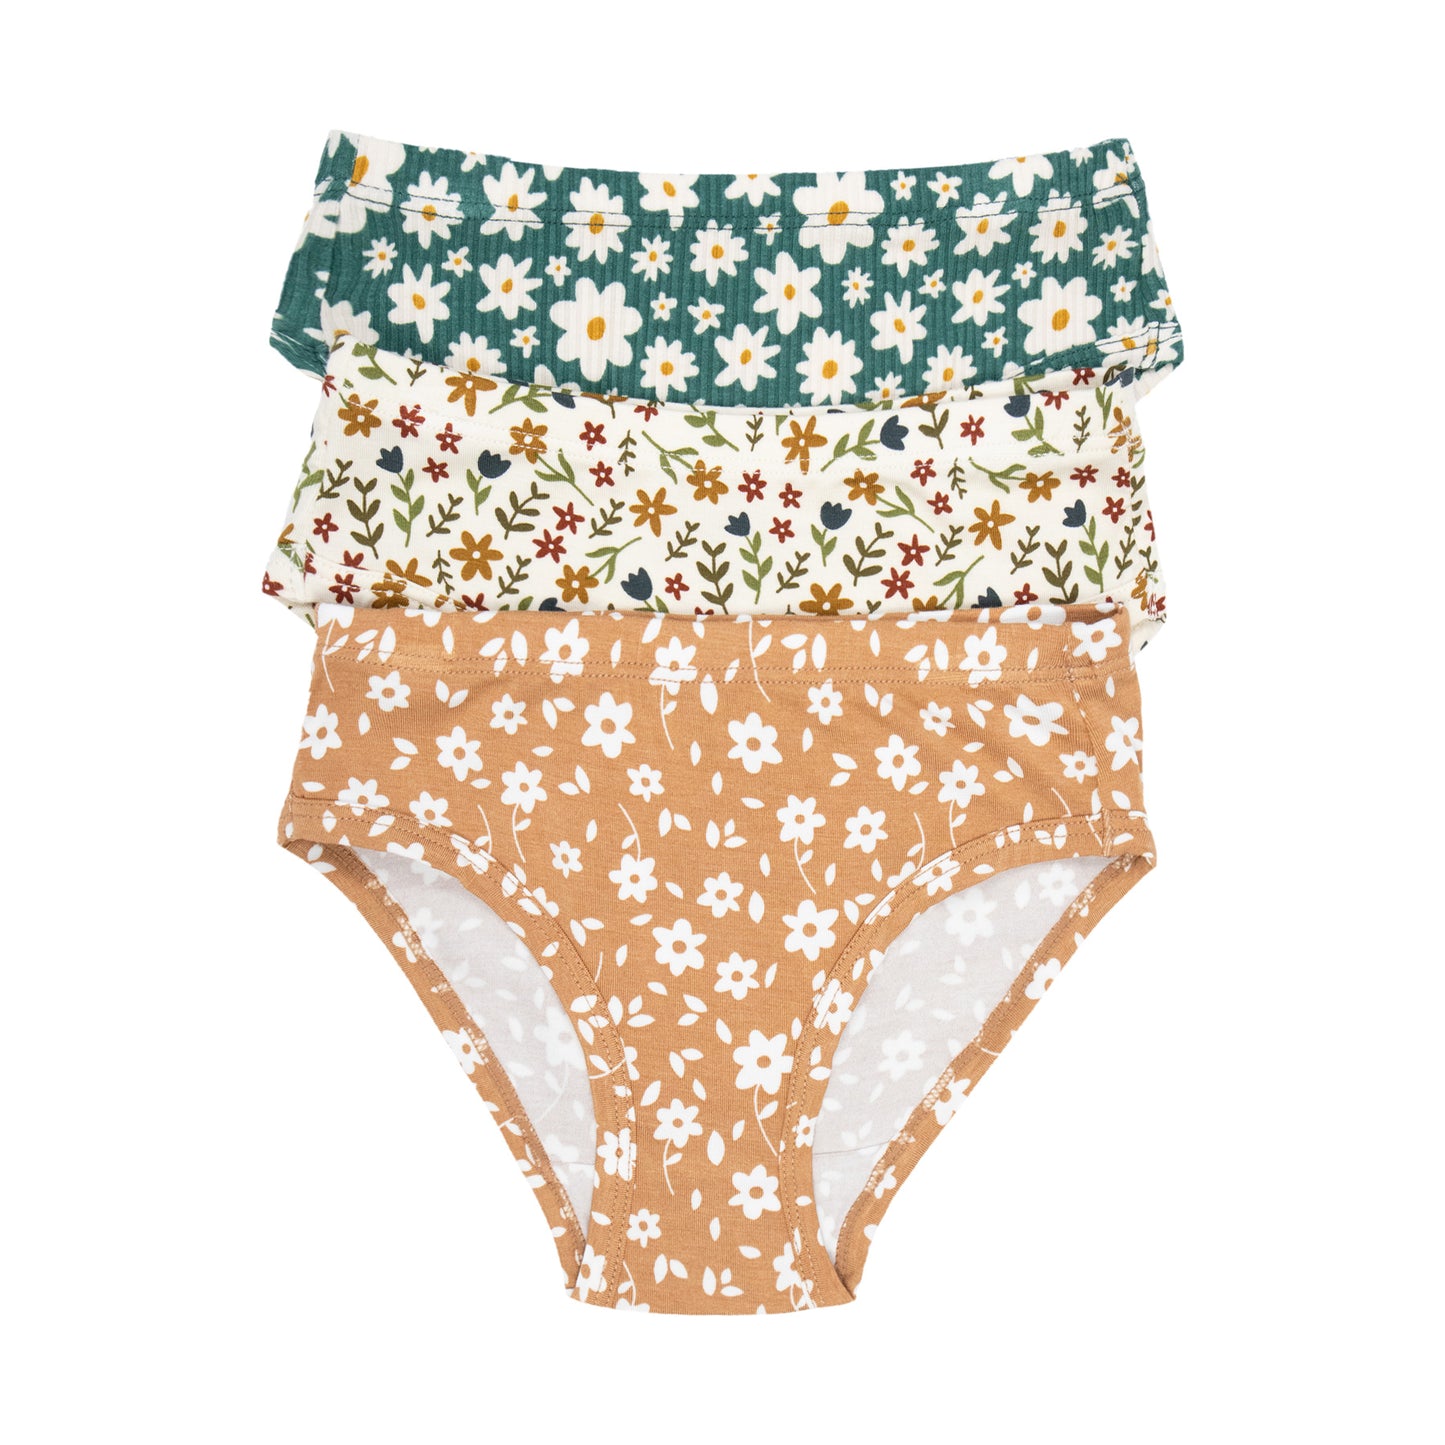 Cream Floral, Camel Floral and Green Floral Underwear 3 Pack